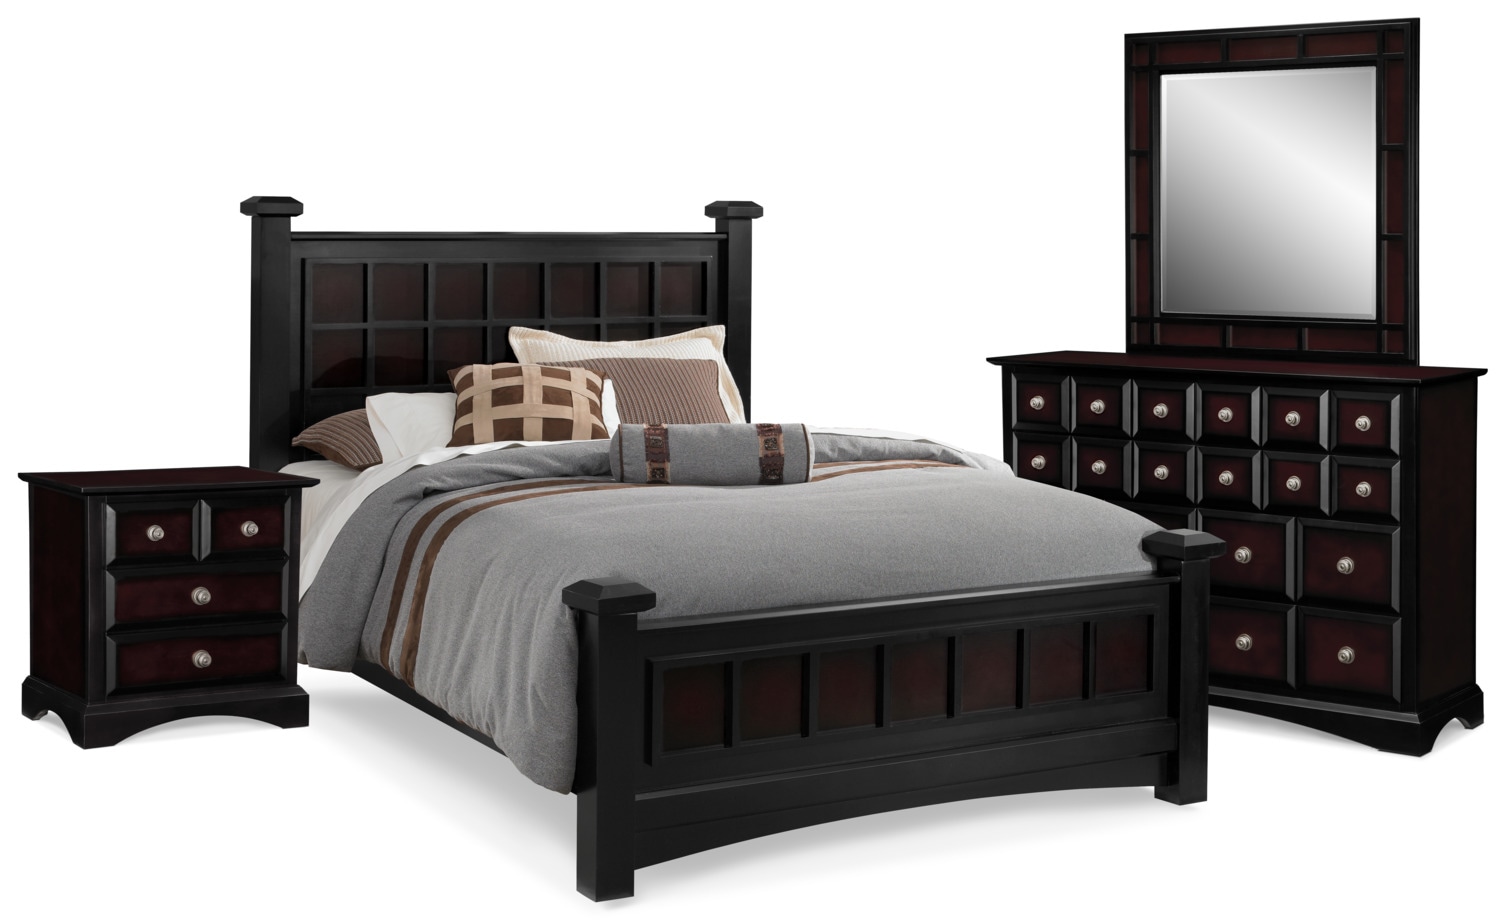 Shop Bedroom Packages | Value City